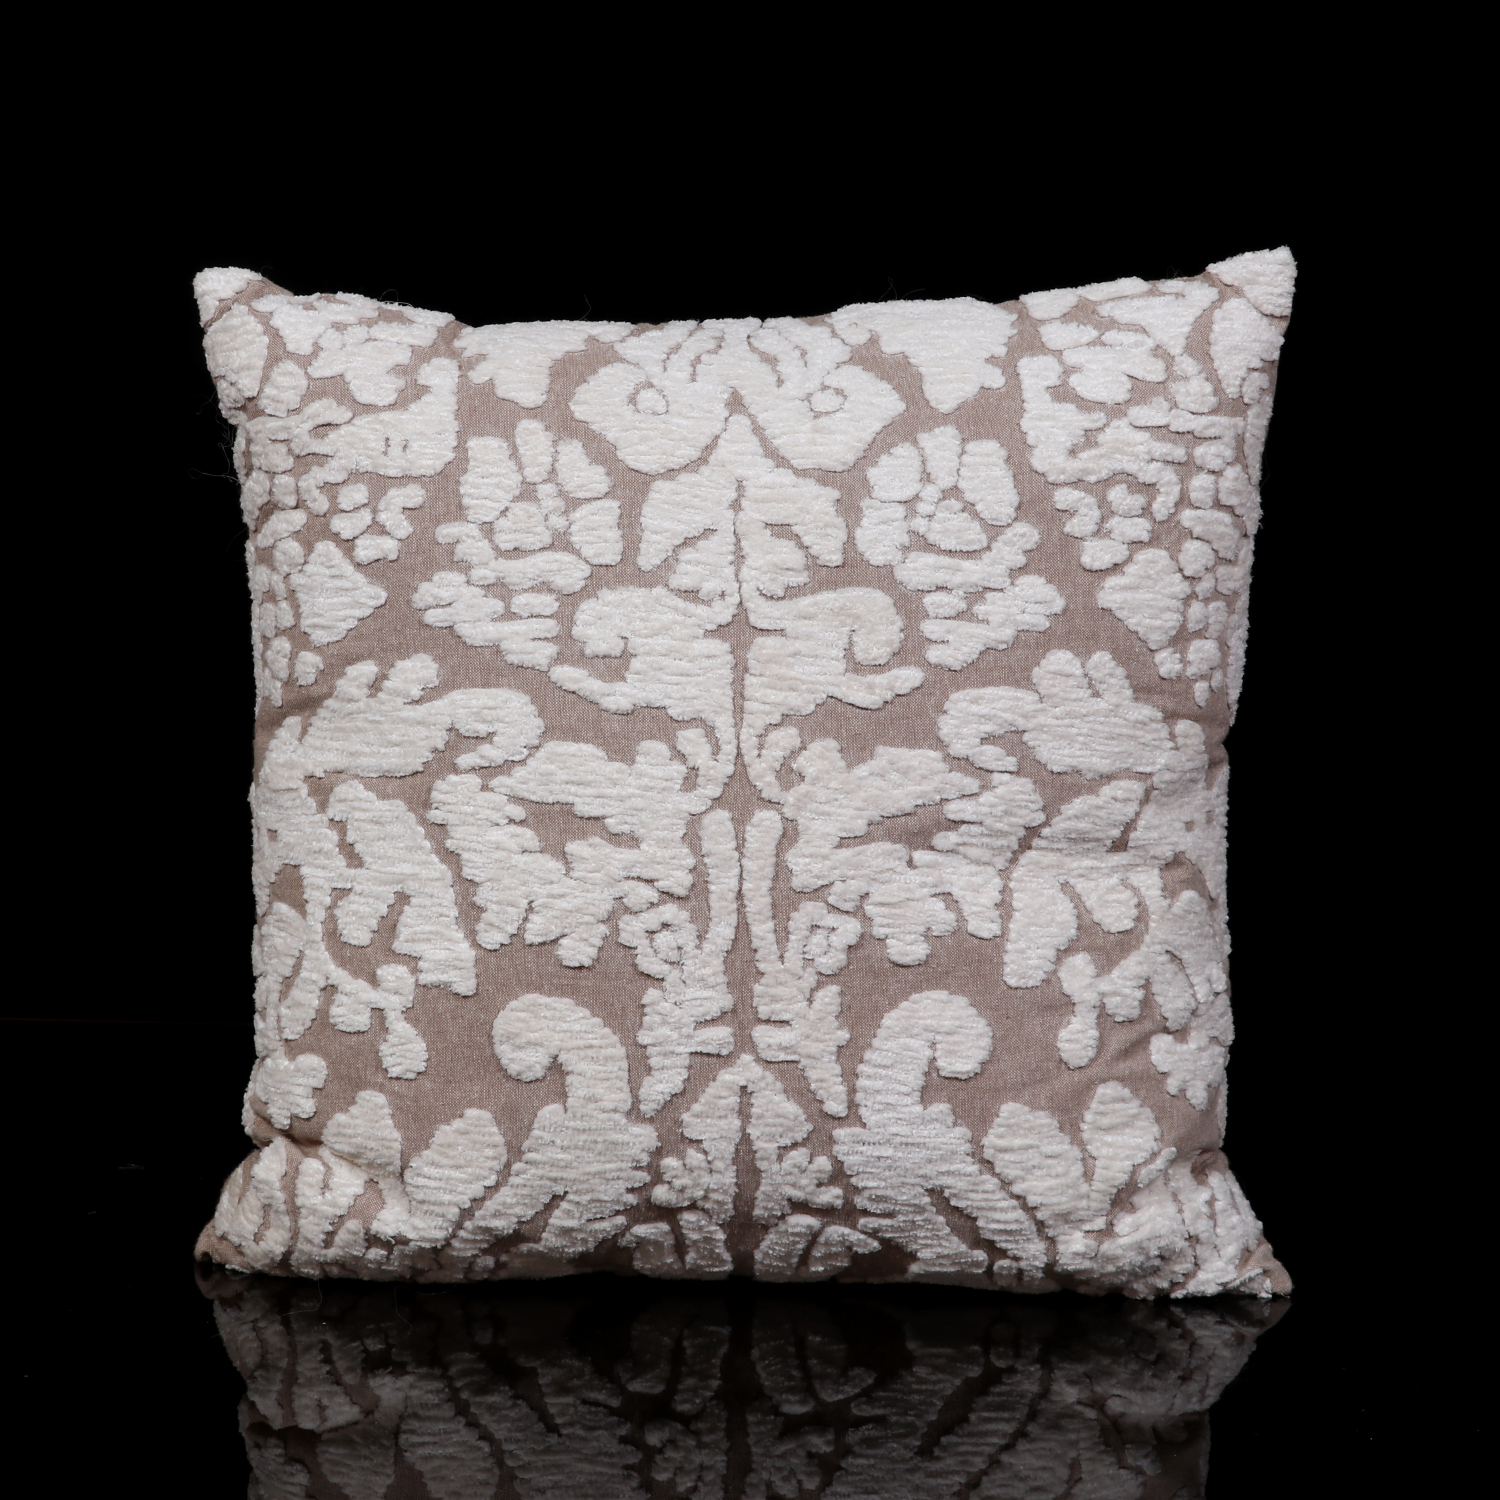 TEXTURED DAMASK DESIGN  EMBROIDERED PILLOW